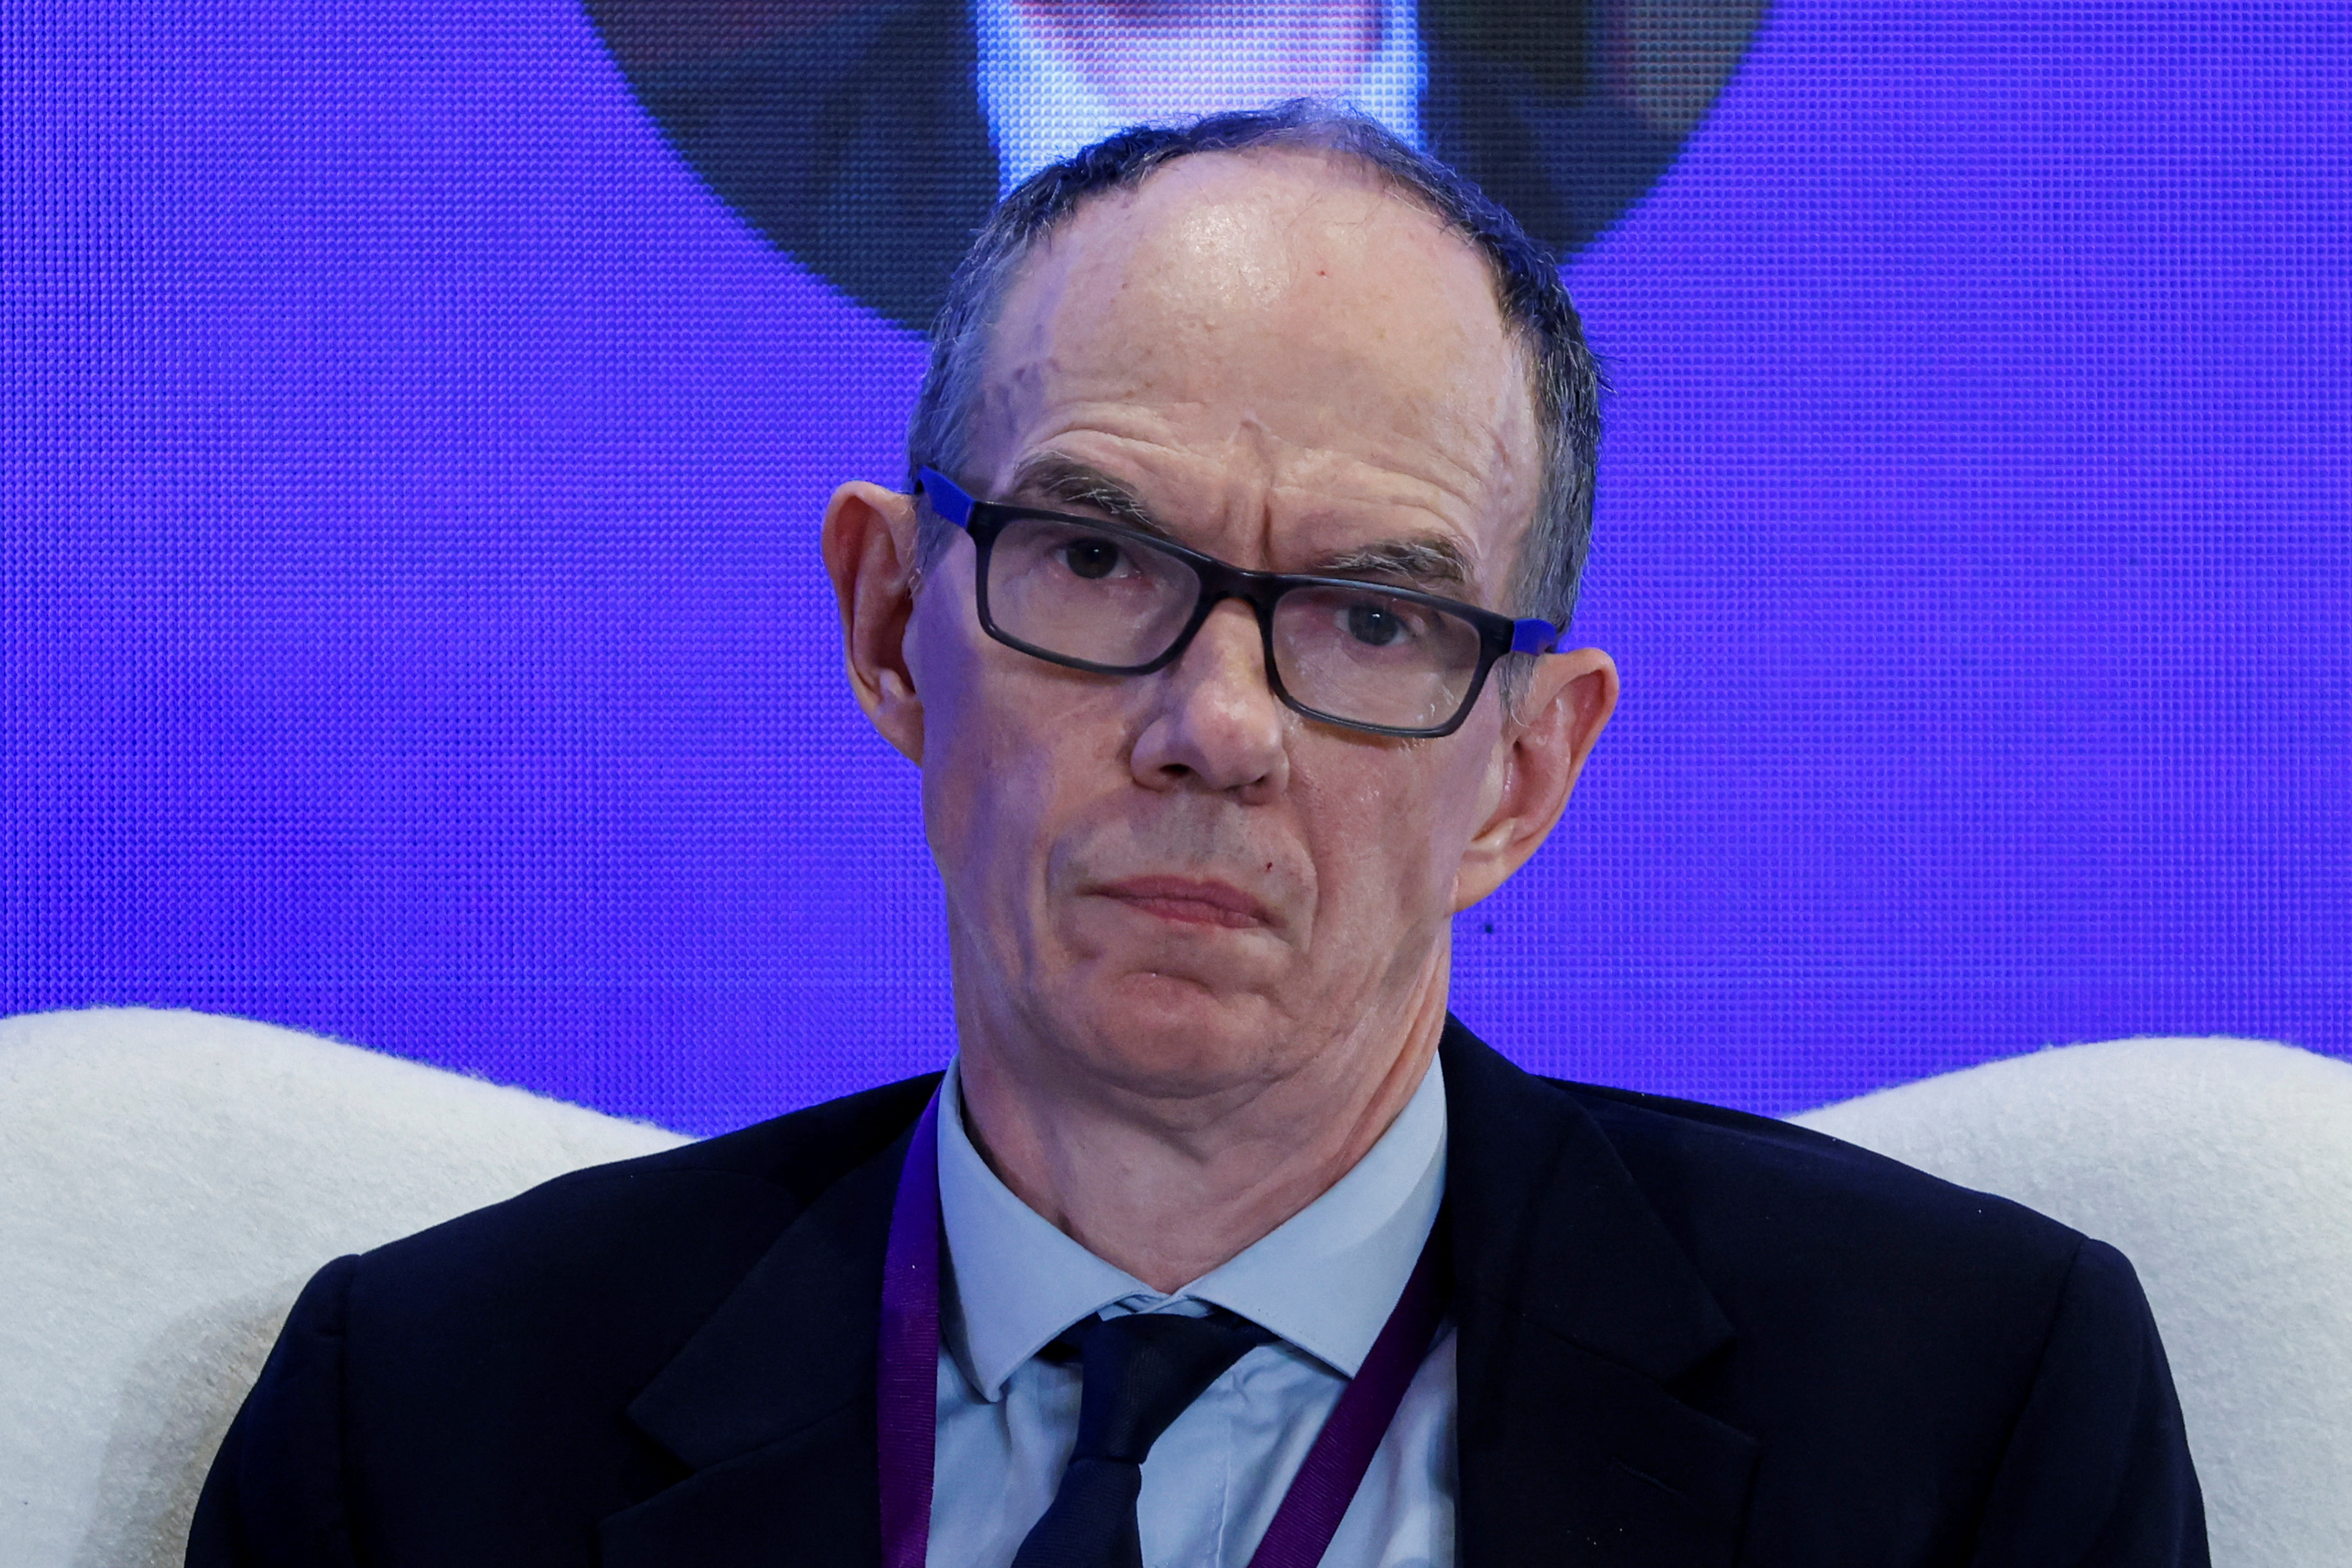 Bank of England's (BoE) Deputy Governor Dave Ramsden, attends the HKMA-BIS High-Level Conference in Hong Kong